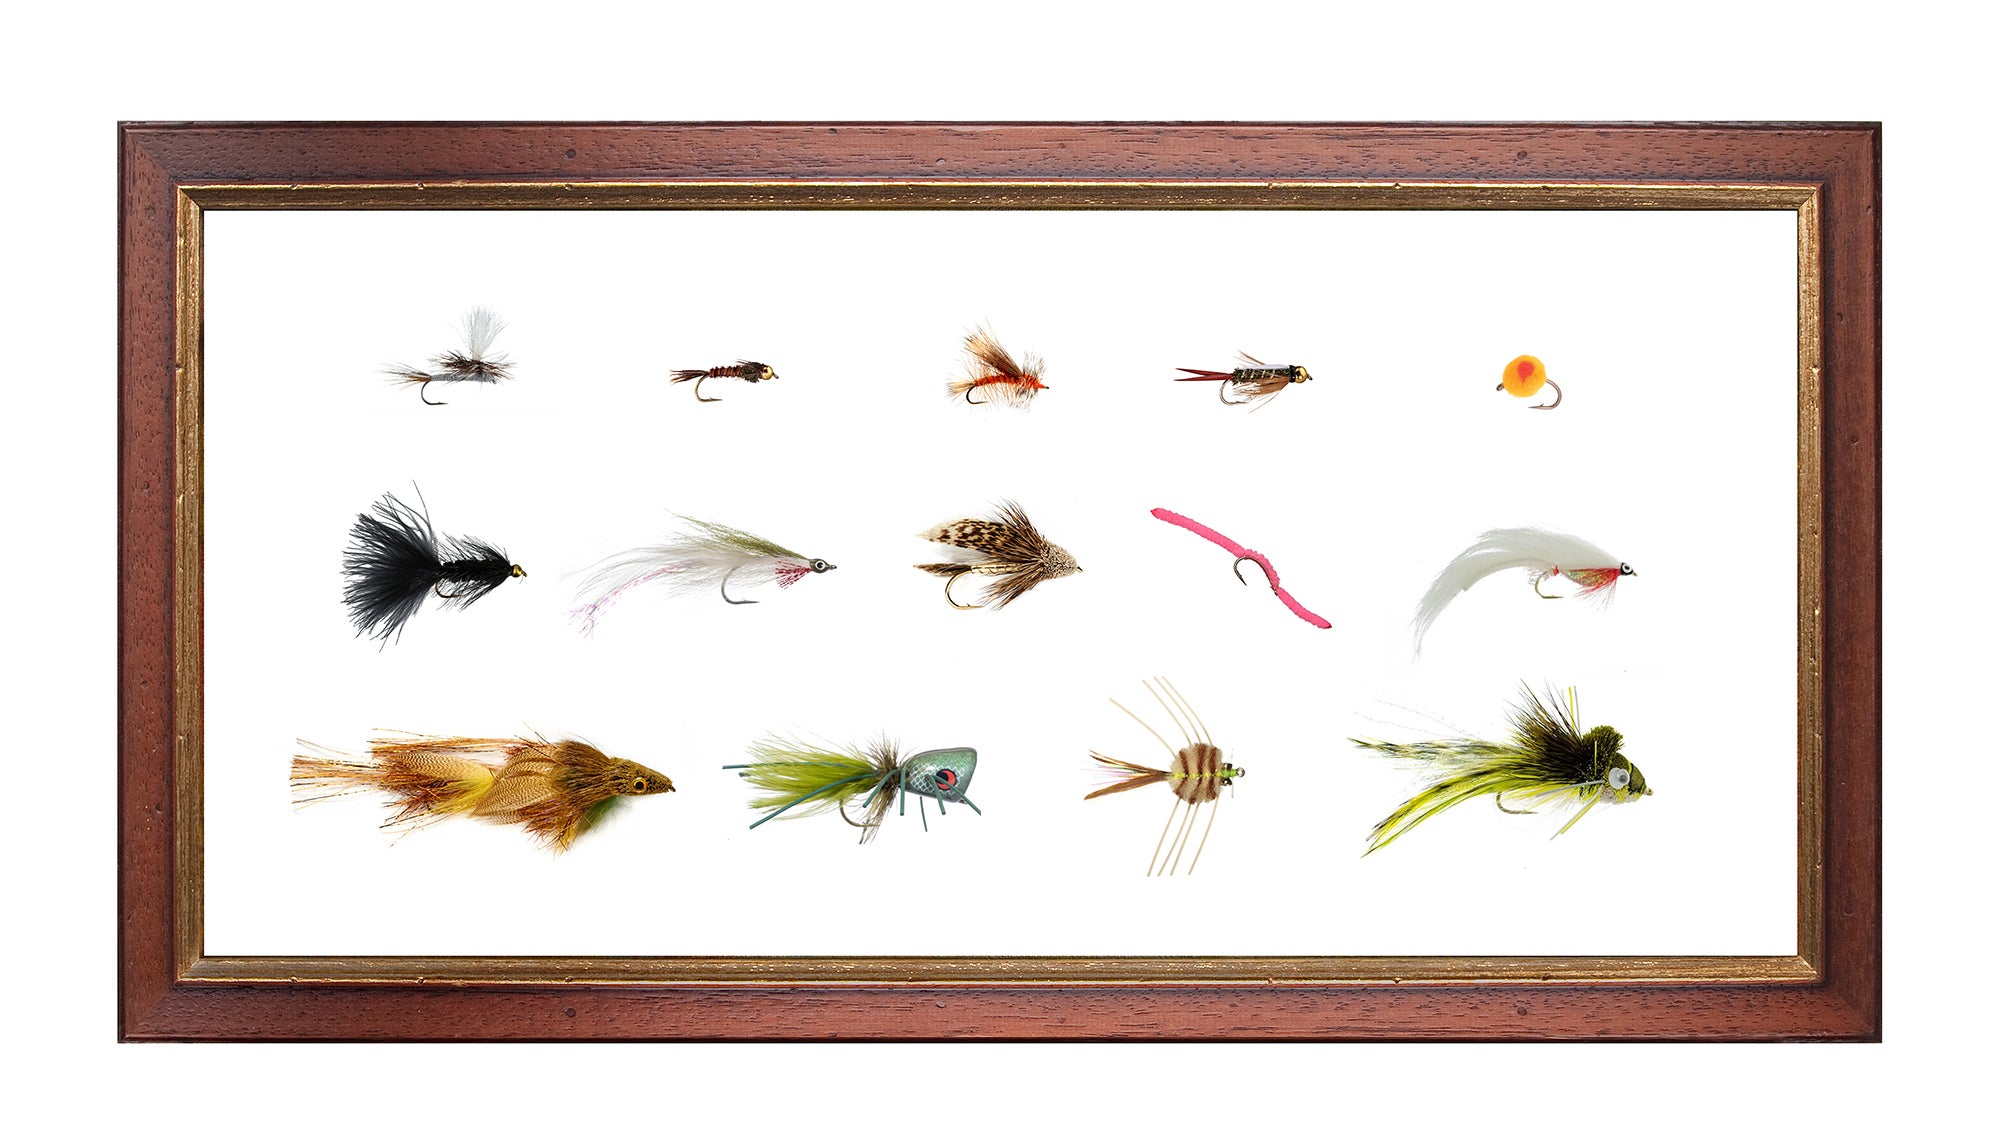 FLIES AS ART - The Fly Shack Fly Fishing